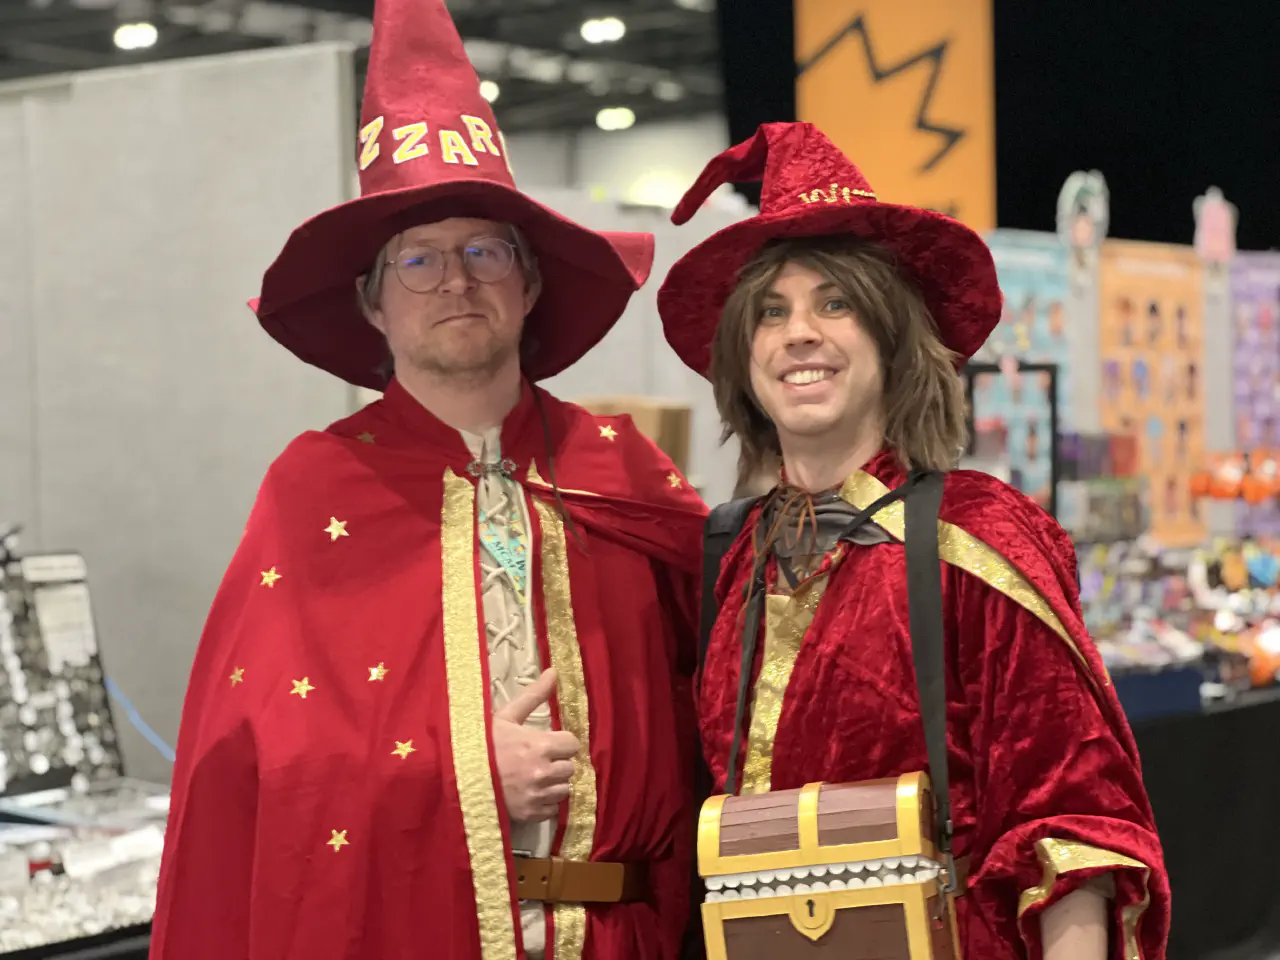 Two people in red robes and pointy hats standing next to each other. They are both dressed as Rincewind.